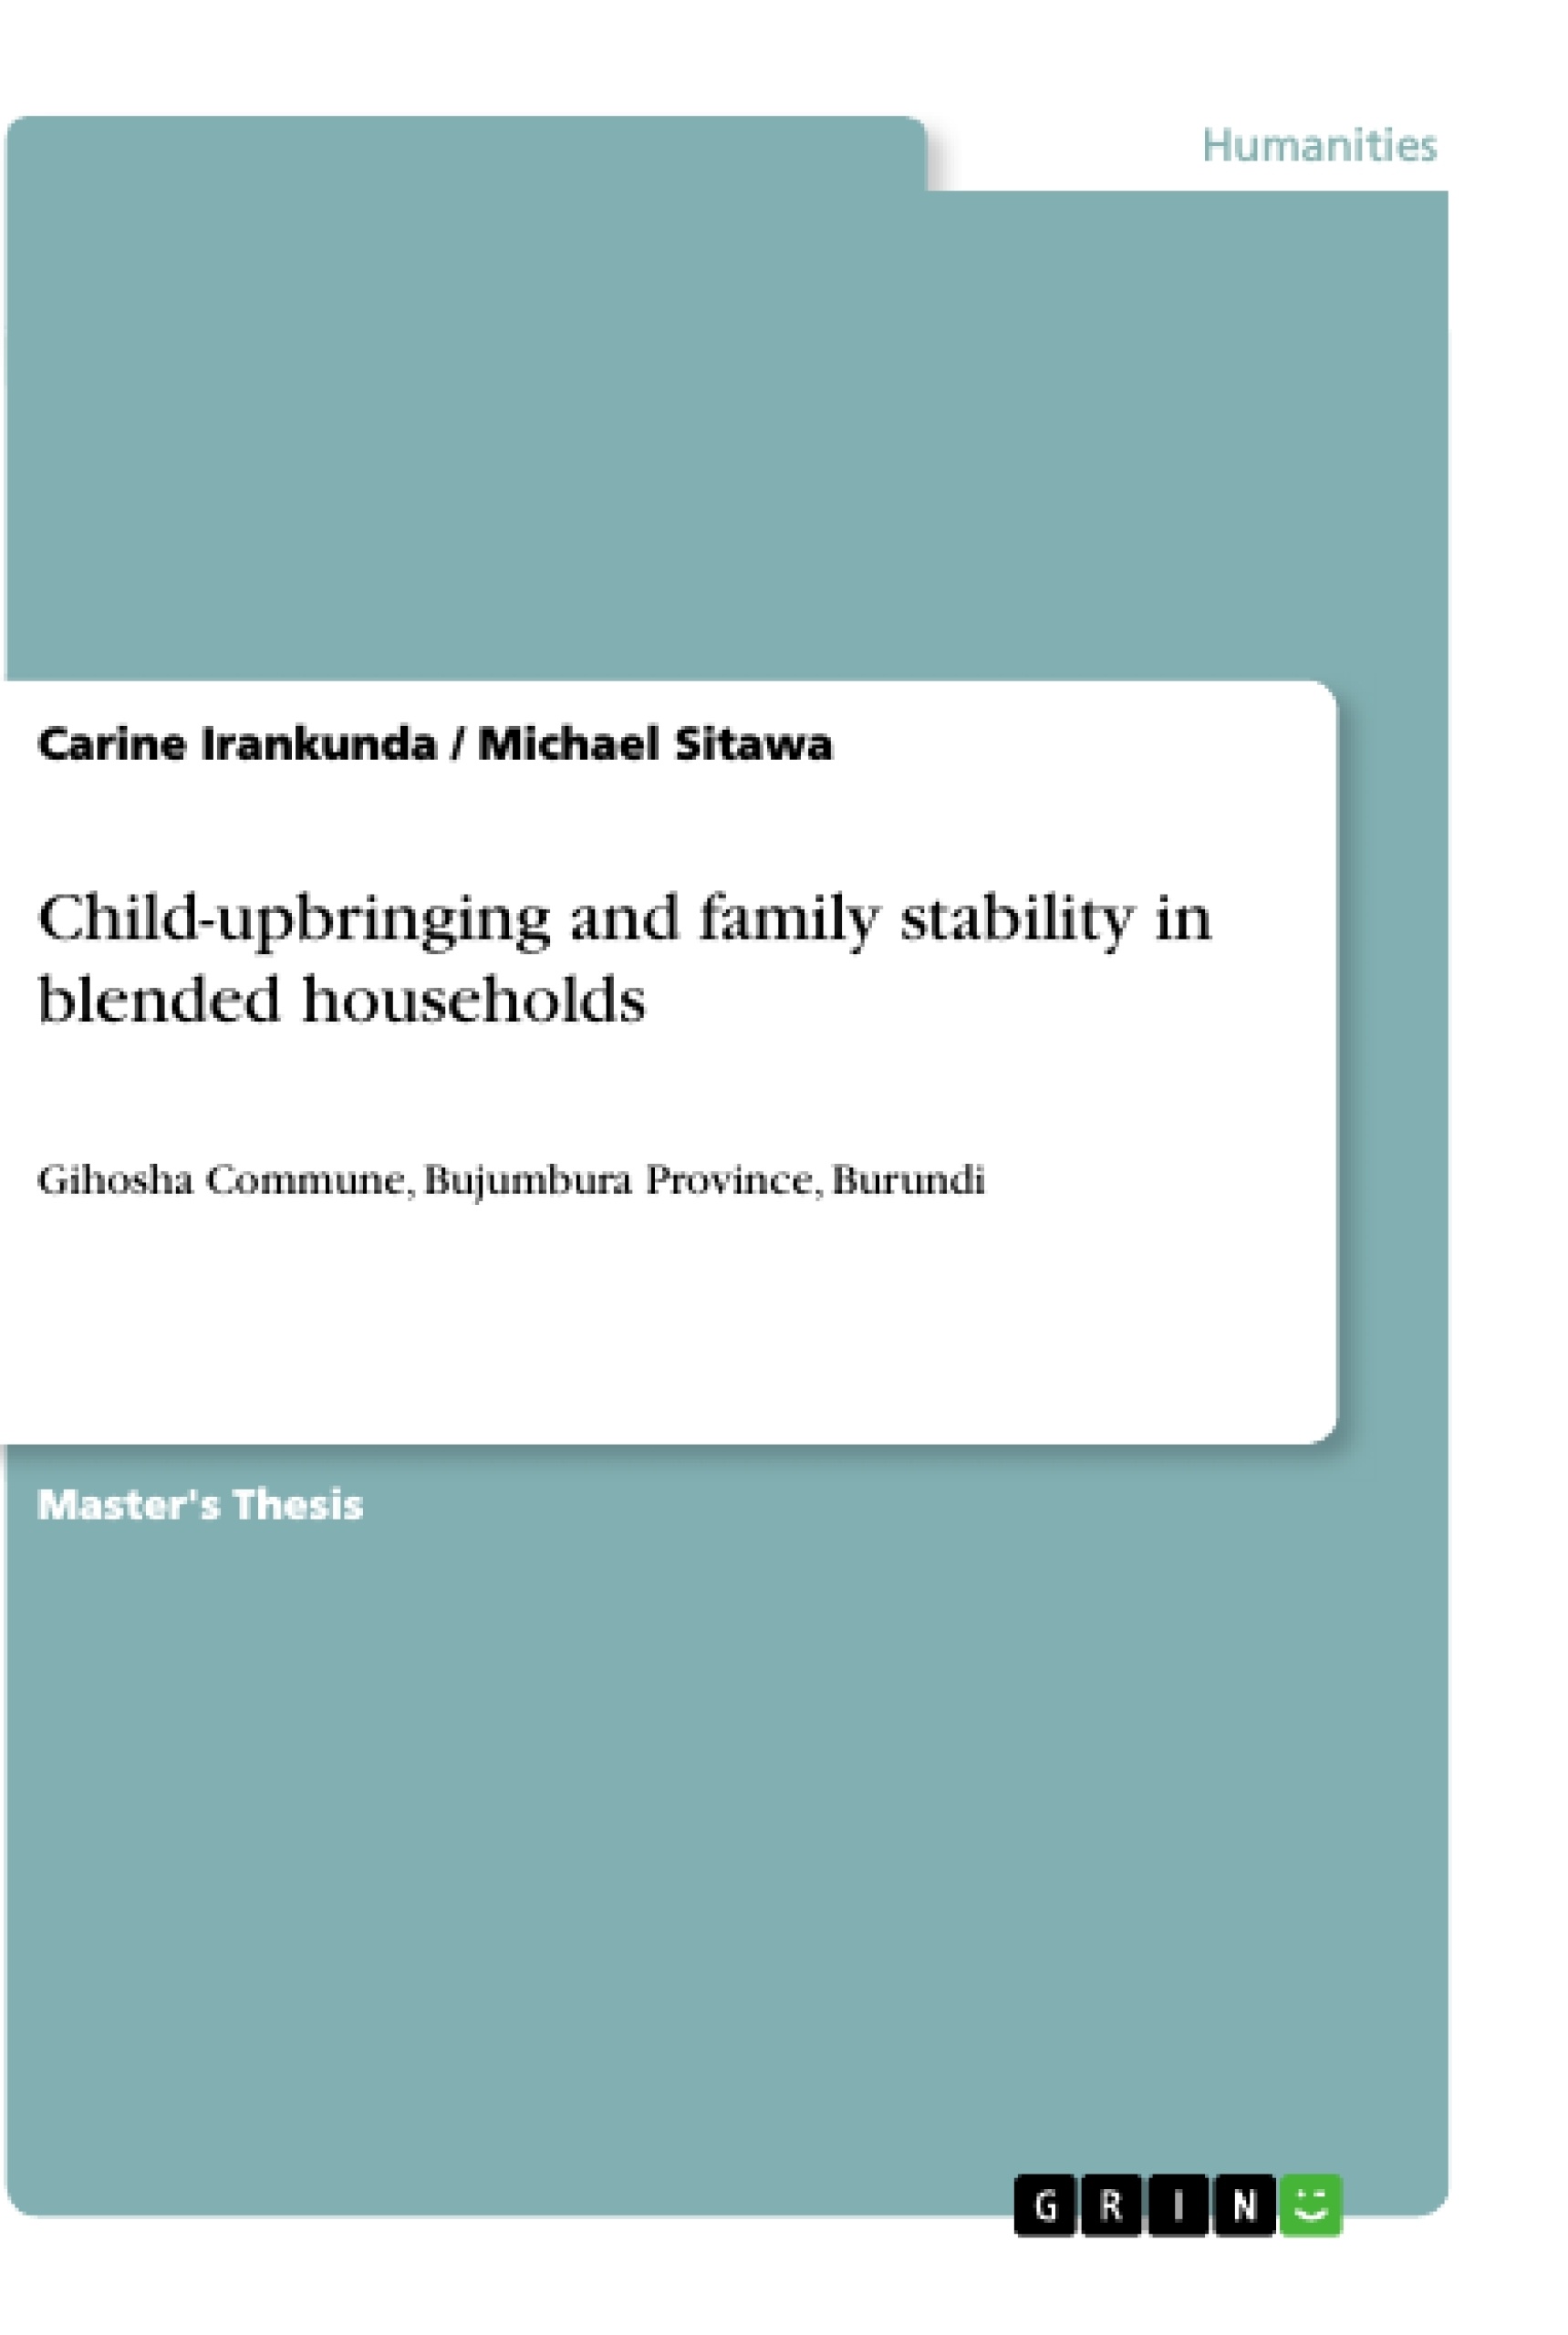 Titre: Child-upbringing and family stability in blended households